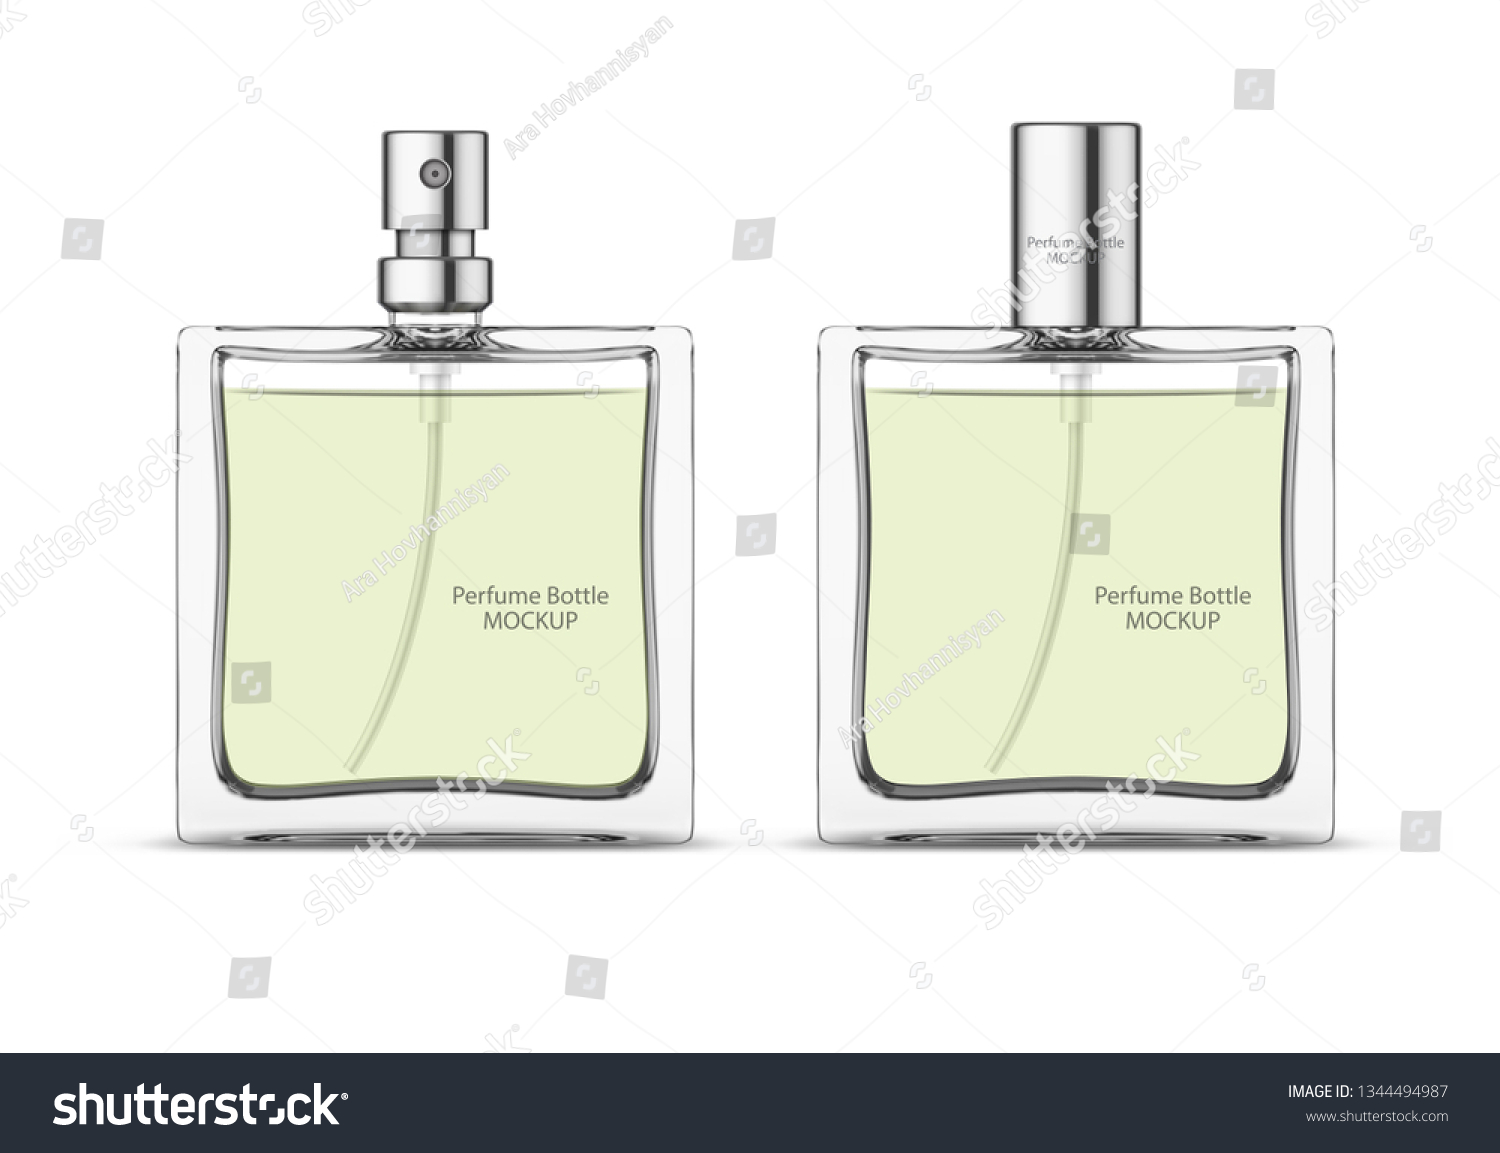 SVG of Perfume glass bottle mockup, blank cosmetic bottles template. Package design. Realistic 3d vector illustration isolated on white background svg